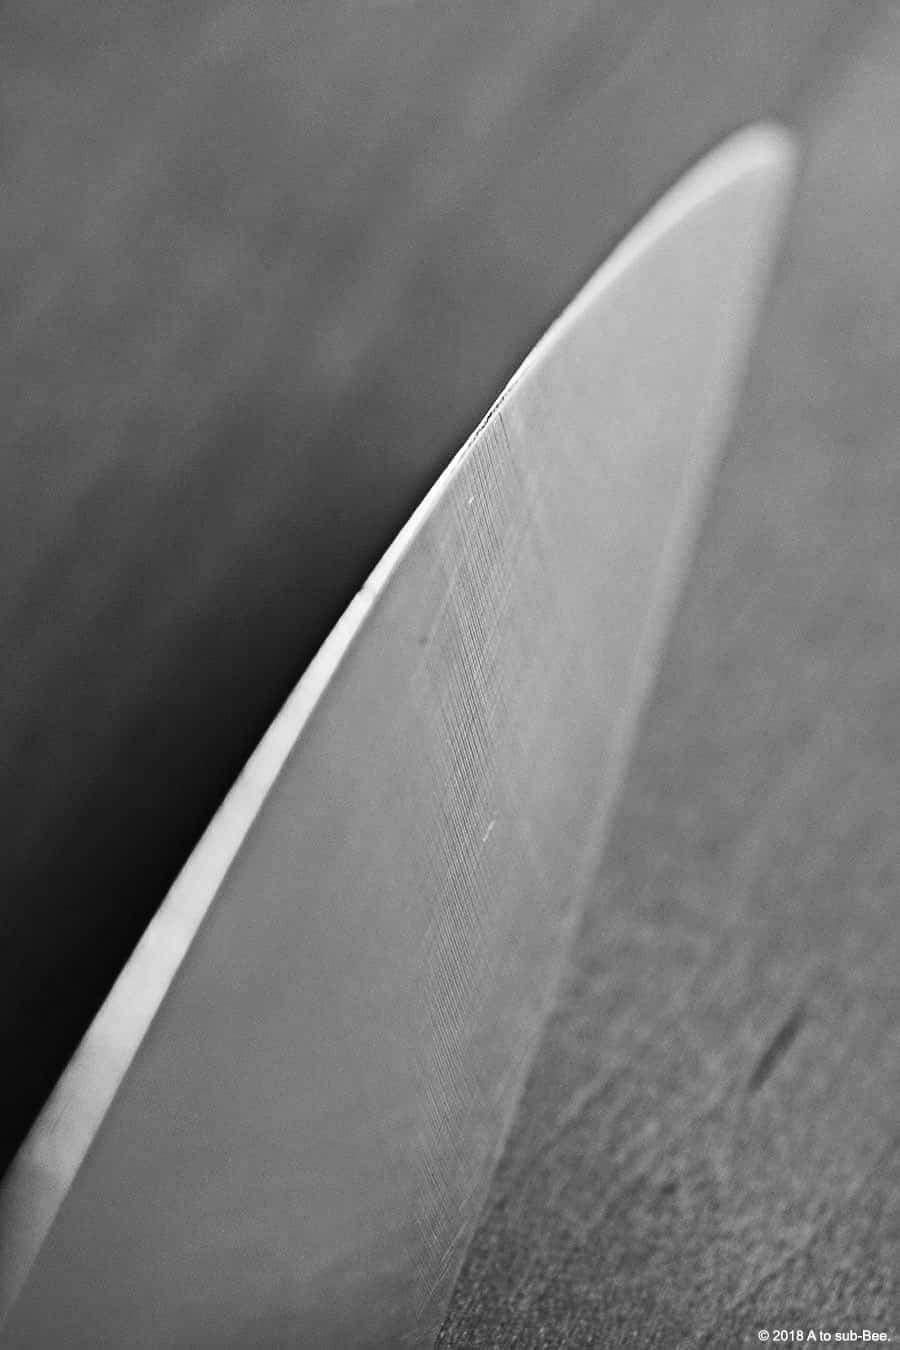 A menacing close up image of the edge of a knife